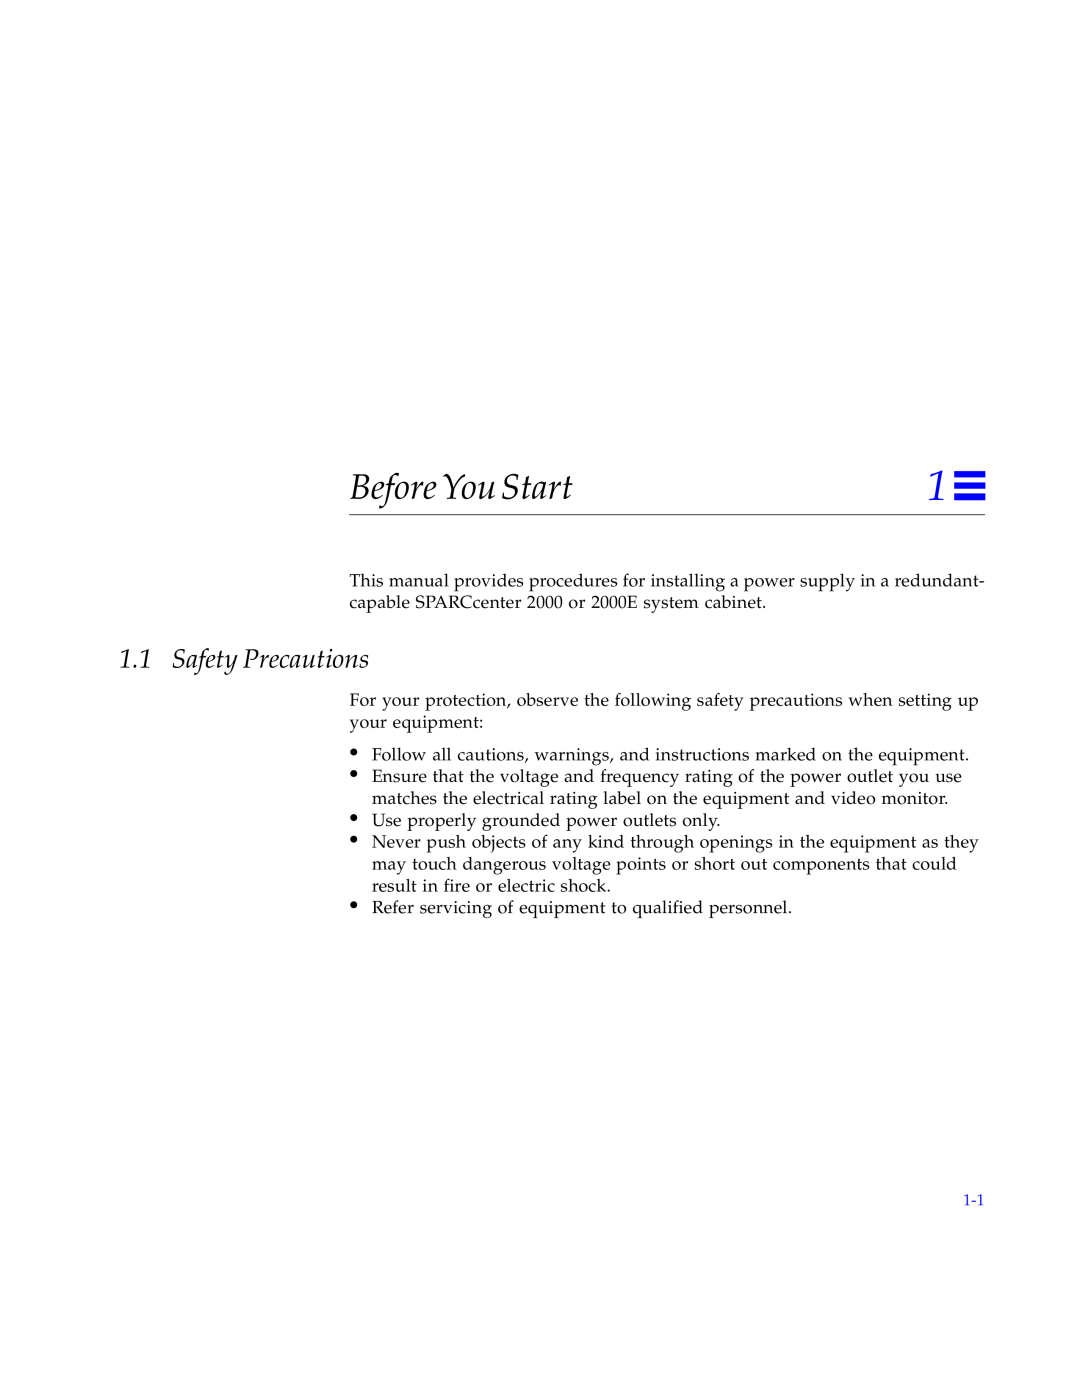 Sun Microsystems 2000E installation manual Before You Start, Safety Precautions 